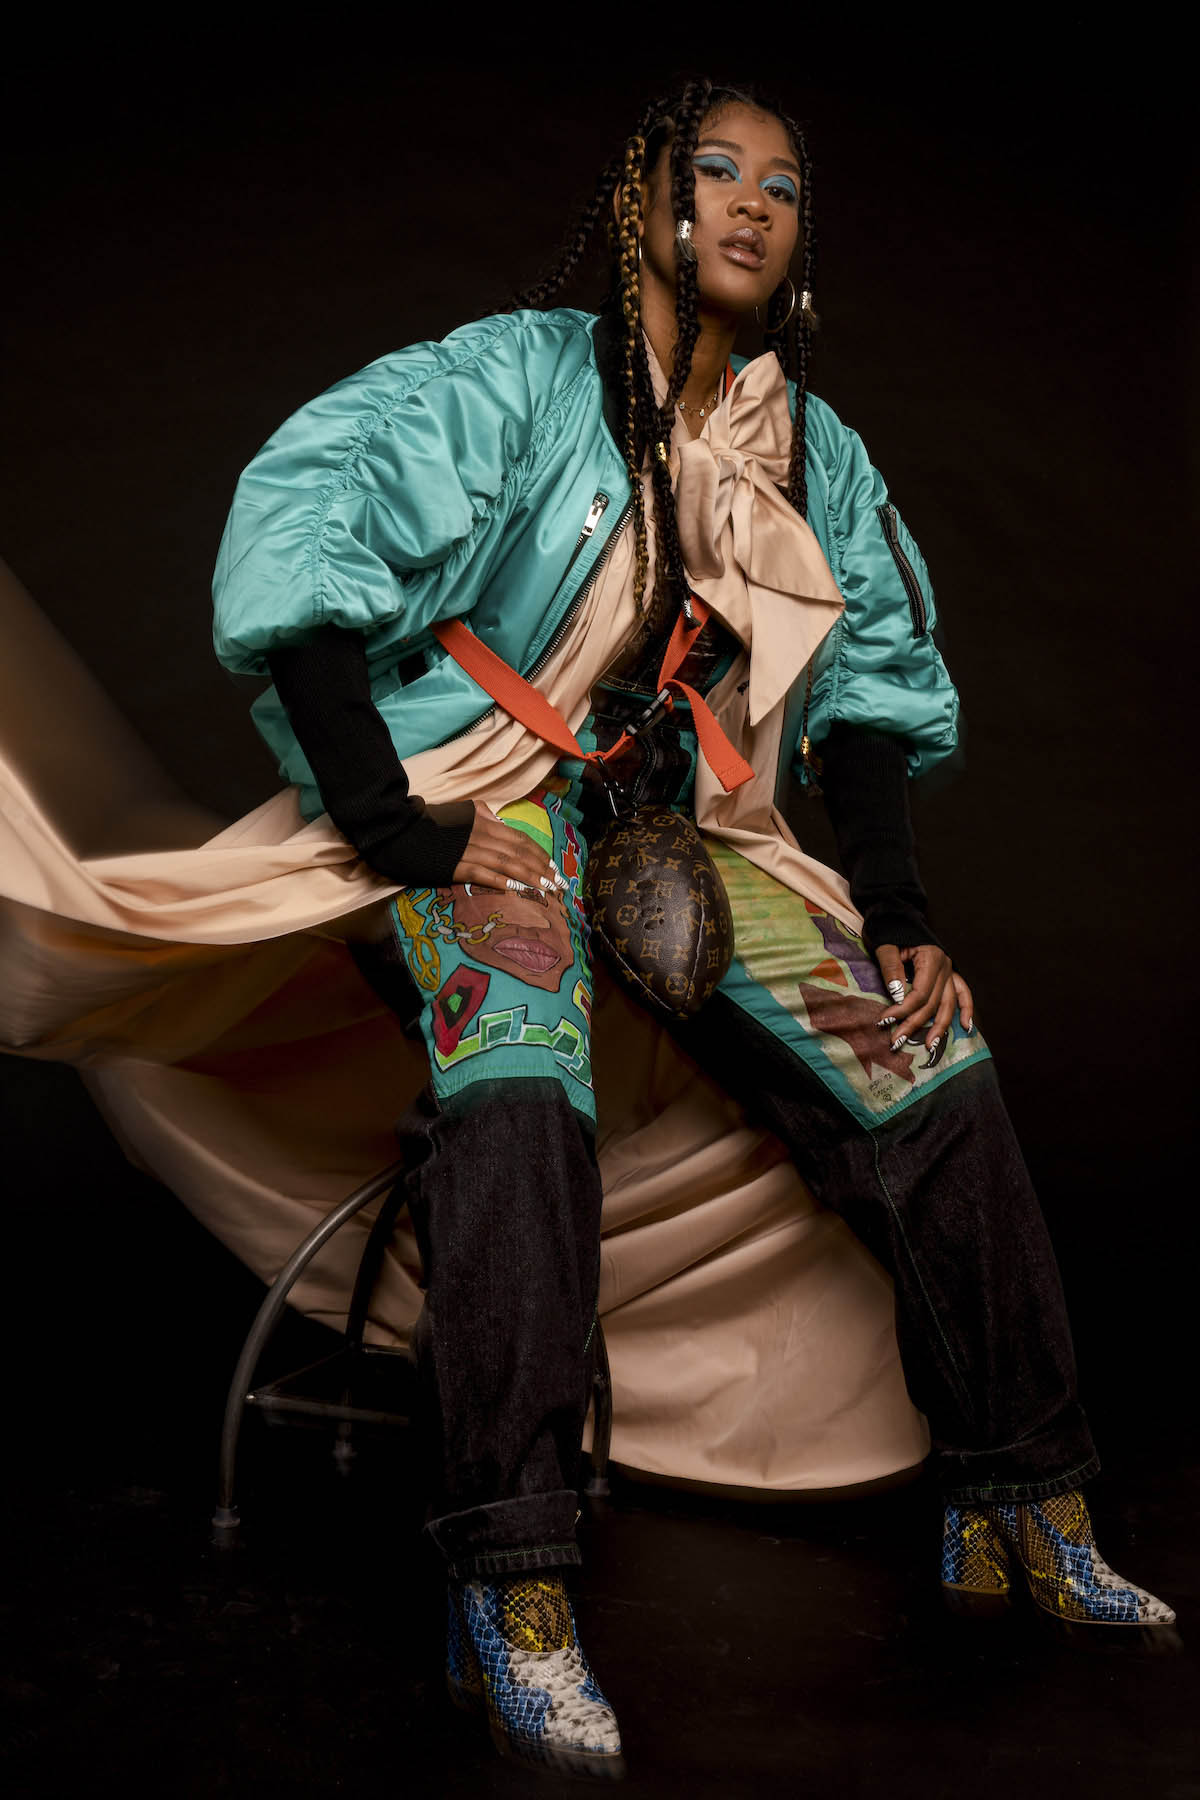 Rose May Alaba sits bent forward on a bar stool. Her legs are almost stretched out as the stool is high. She wears high-heeled, pointed shoes in a blue-beige-gold snakeskin look, black trousers with large turquoise-coloured patches covering her thighs. One of the patches shows the face of a black person with a chain from nose ring to ear. Between Rose May Alaba's legs hangs a brown bag with a red strap and typical Louis Vuitton pattern, the shape of which looks like an American football. Rose May Alaba rests her right hand on her right leg, the other rests loosely on her left. She looks firmly into the camera. Her eyelids are painted turquoise, the colour of her bomber jacket as well. Underneath, she wears an apricot-coloured long silk dress, open at the front, tied with a bow at the chest and falling almost to the floor behind the bar stool. On the left side of the picture, however, it is draped airily upwards. Rose May Alaba's long black hair is braided into several plaits.